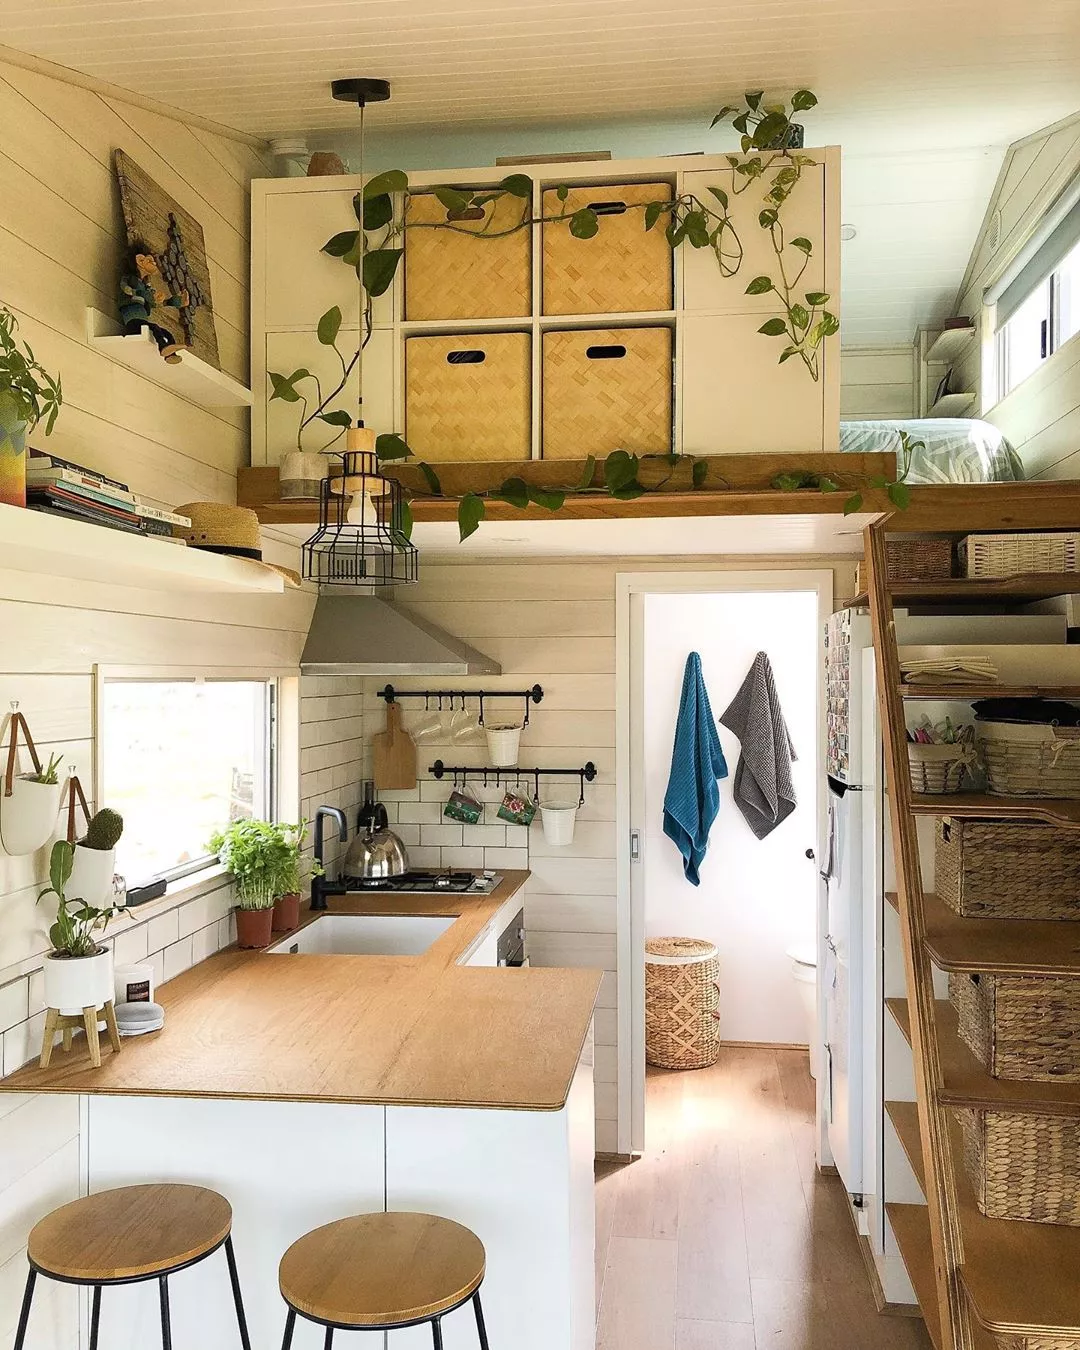 Rustic tiny house has a spacious interior and a balcony up top